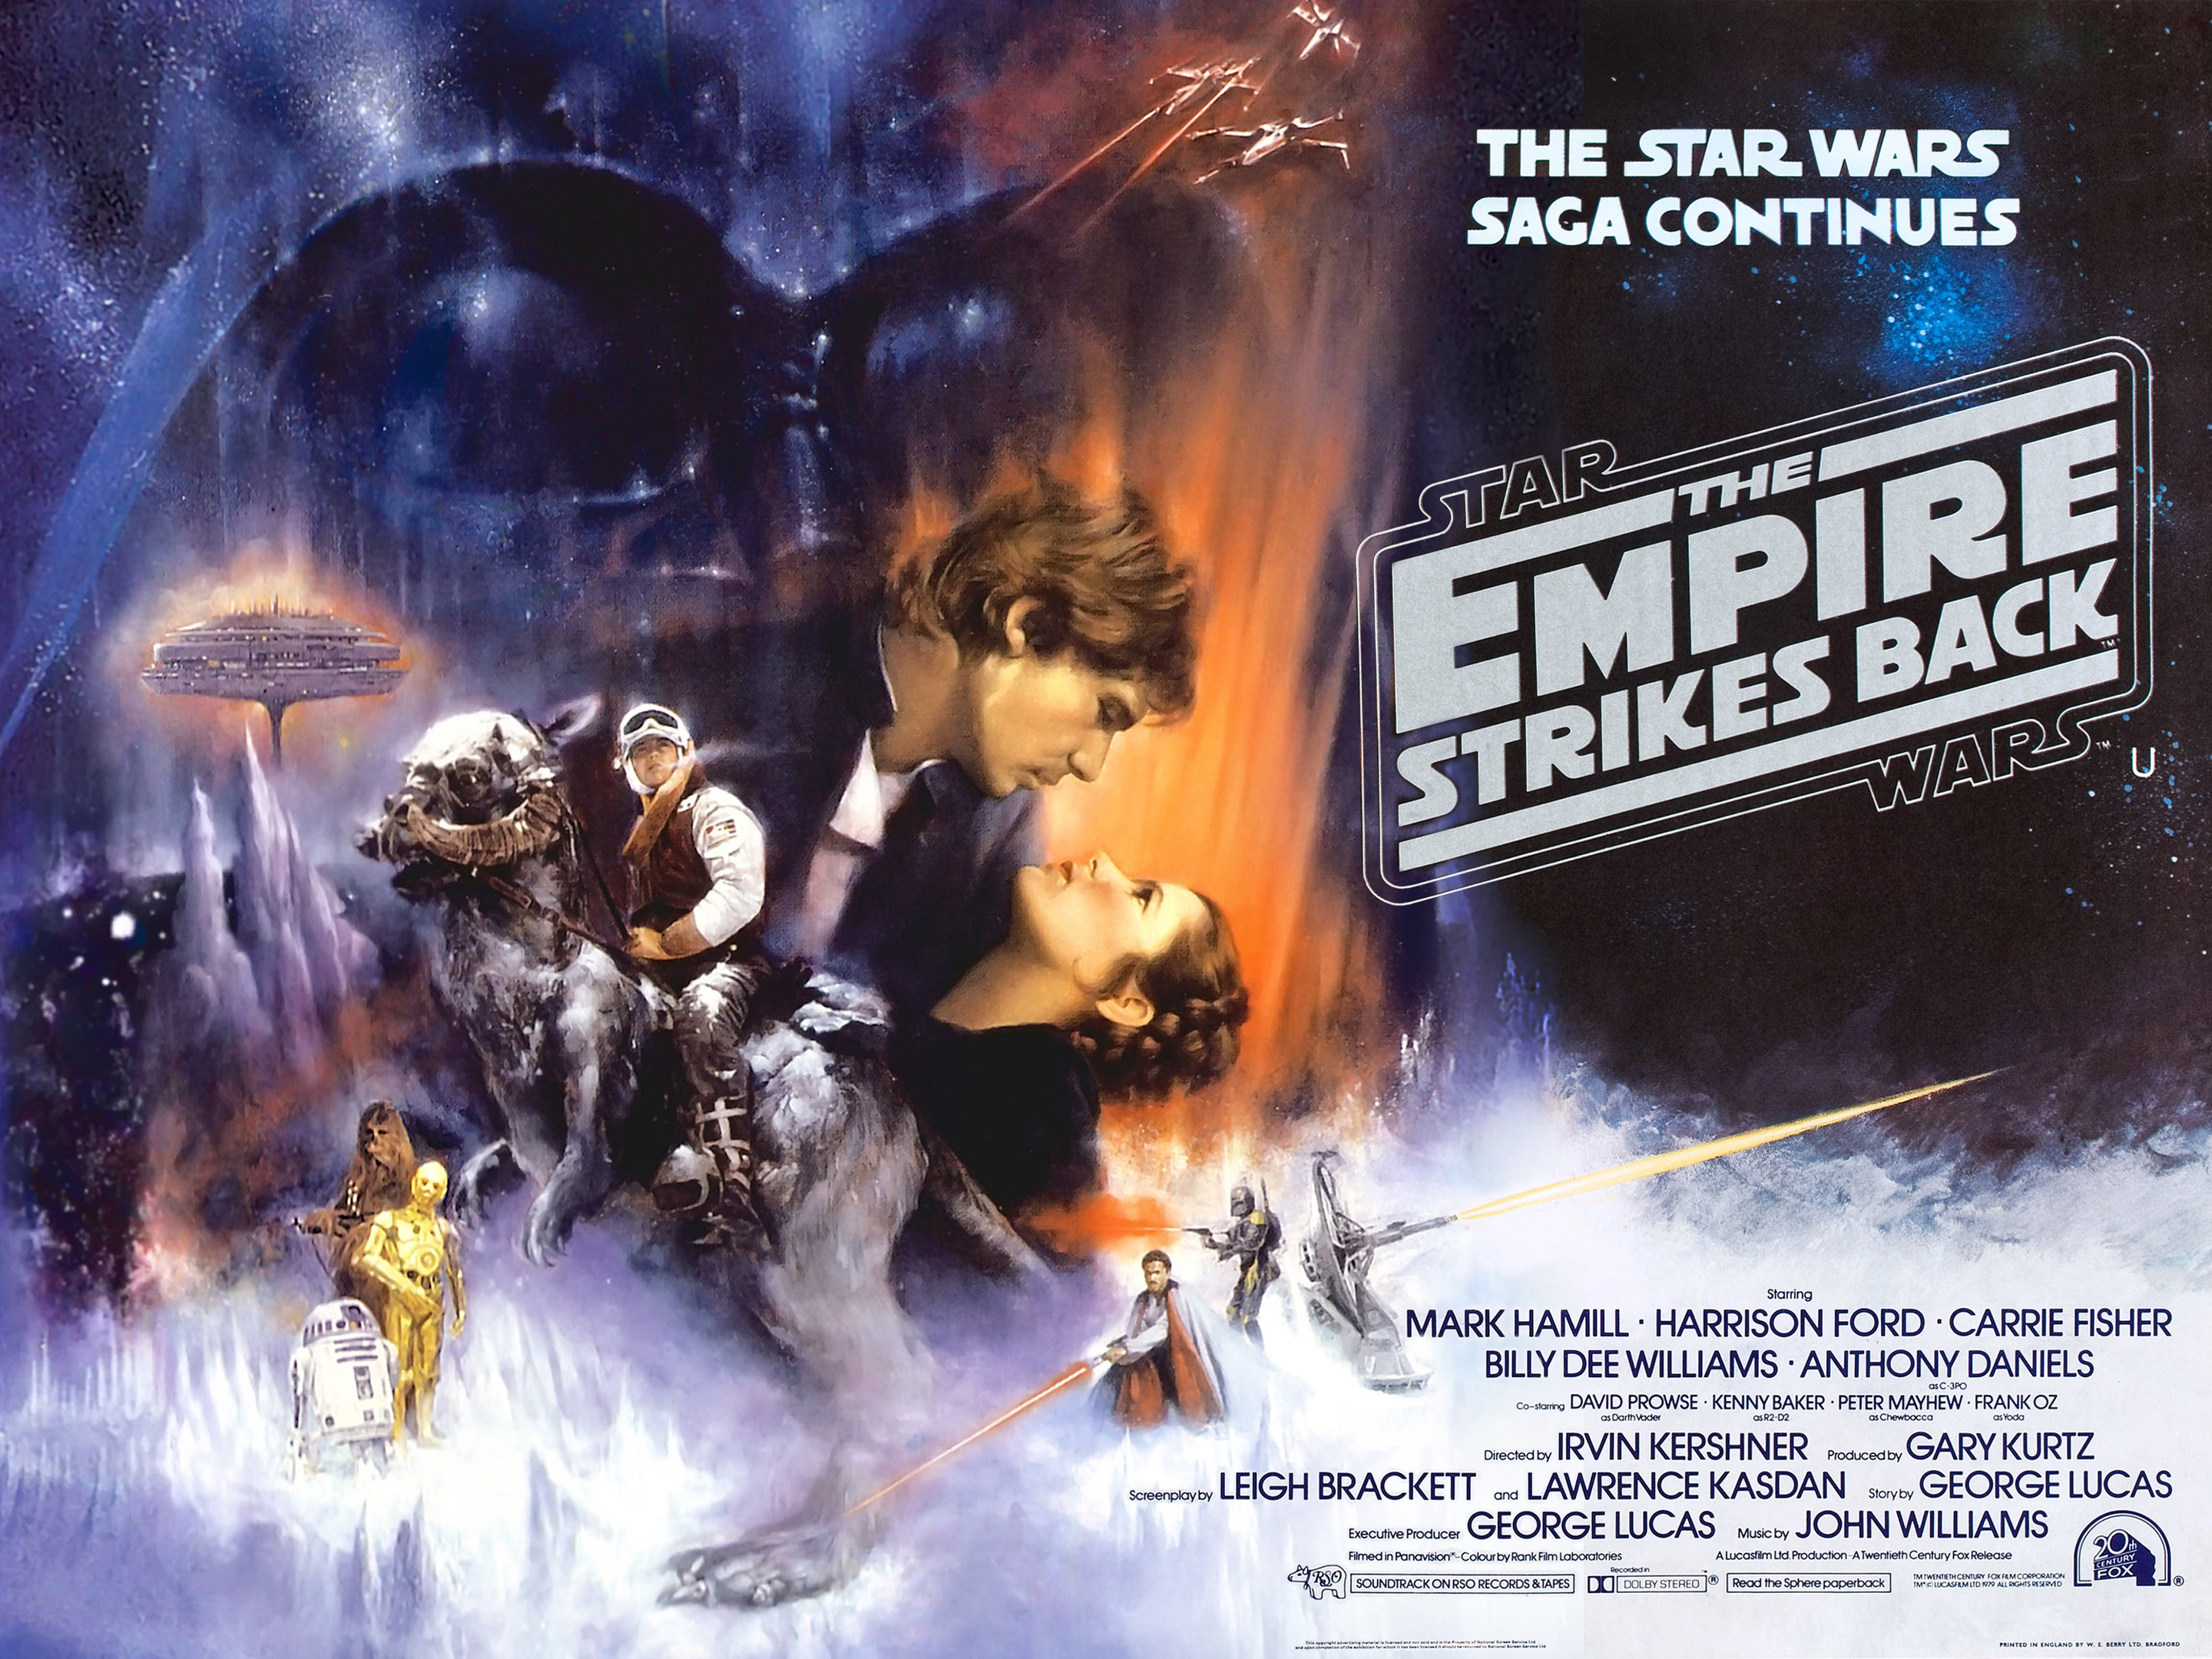 The Cleveland Orchestra: Sarah Hicks - Star Wars' The Empire Strikes Back - Film With Live Orchestra at Blossom Music Center